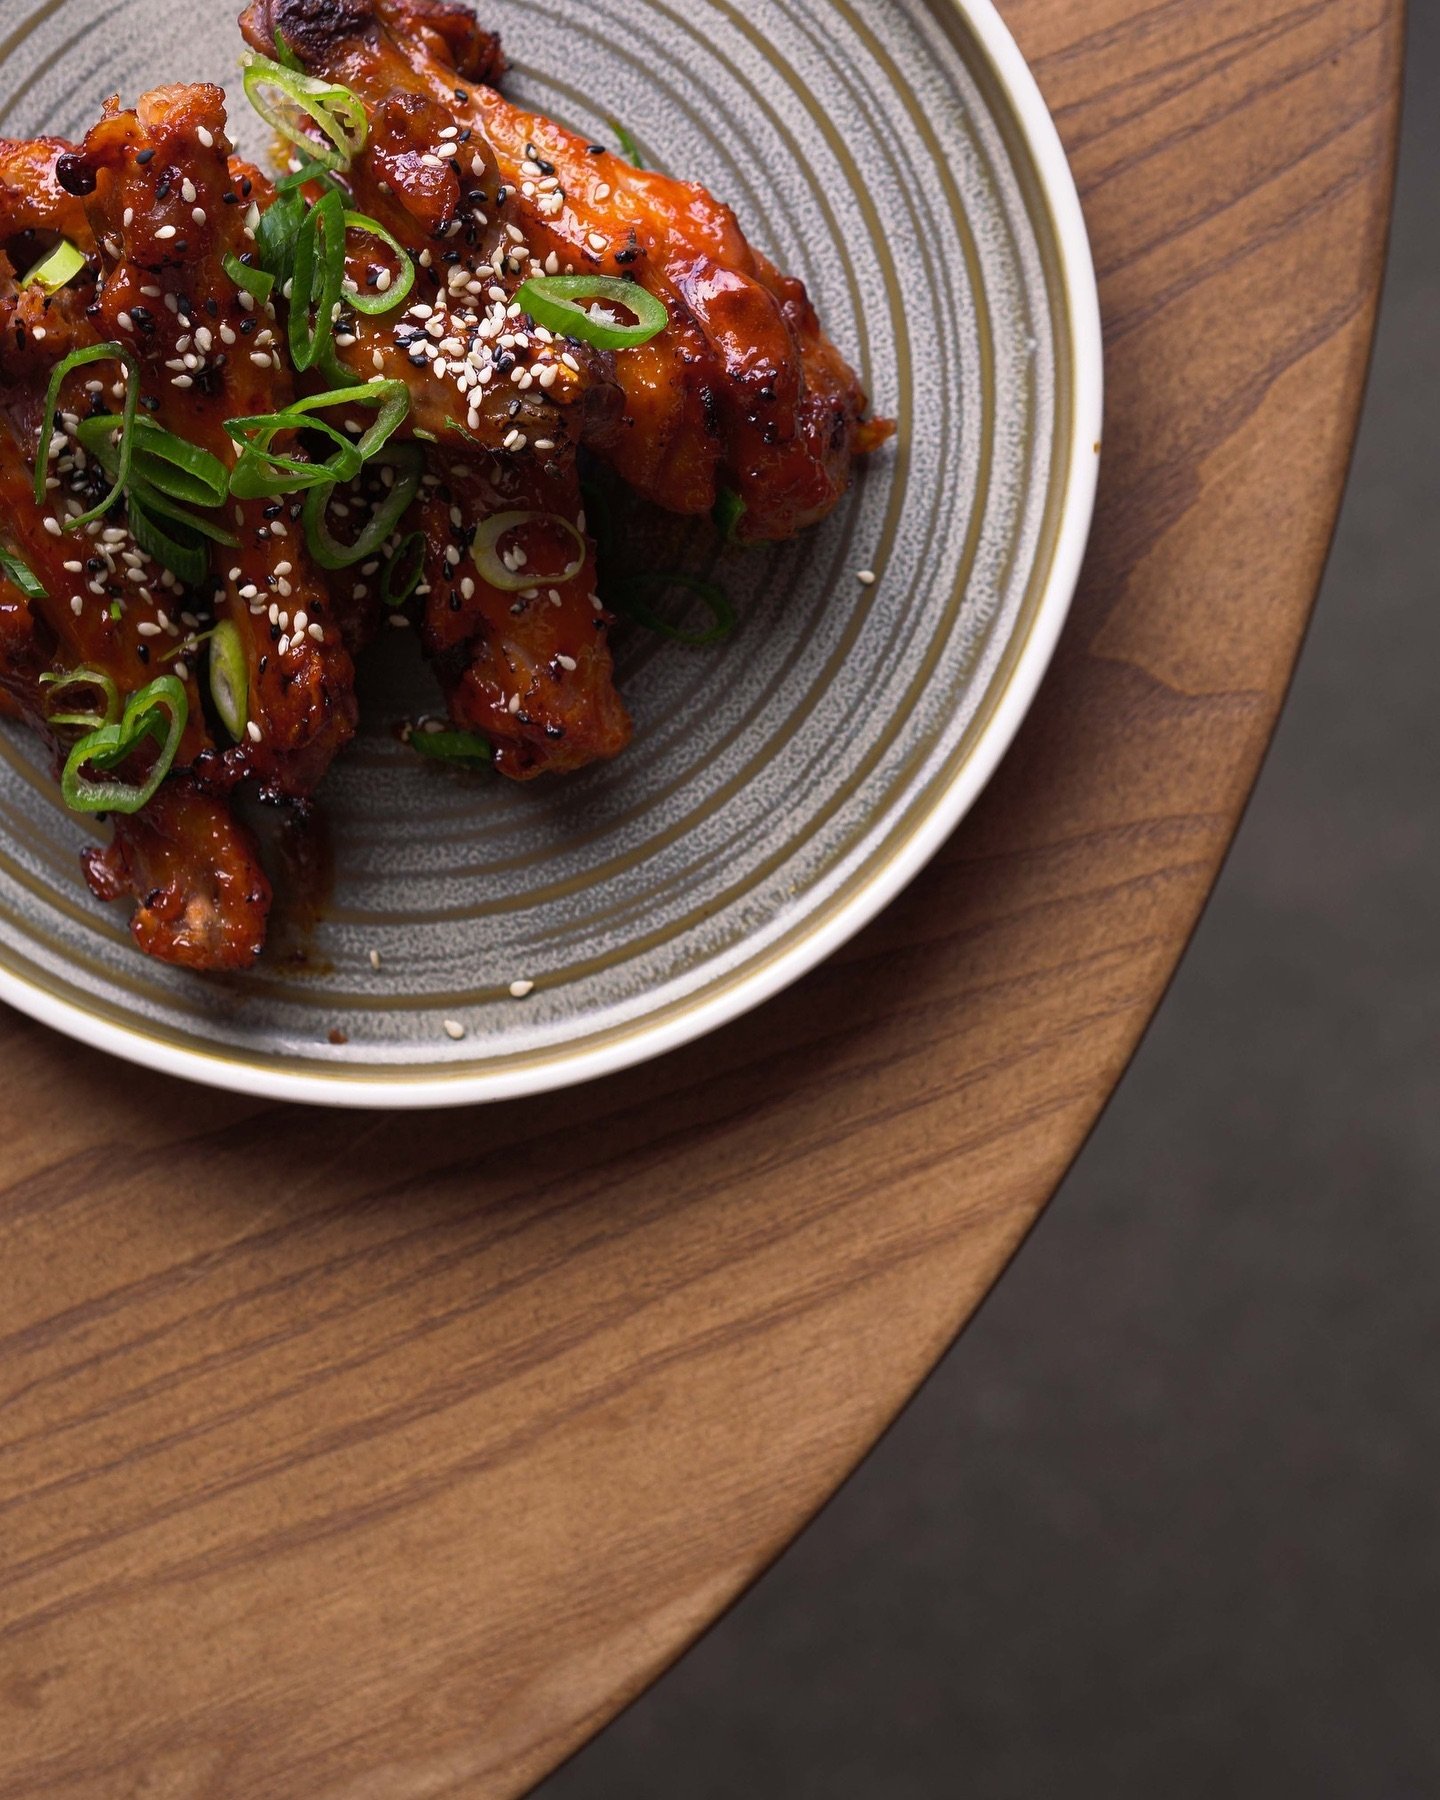 Duck Wings | gochujang, sesame, miso aioli⁠
⁠
The quintessential bar snack. Elevated. ⁠
⁠
⁠
⁠
#thewatson